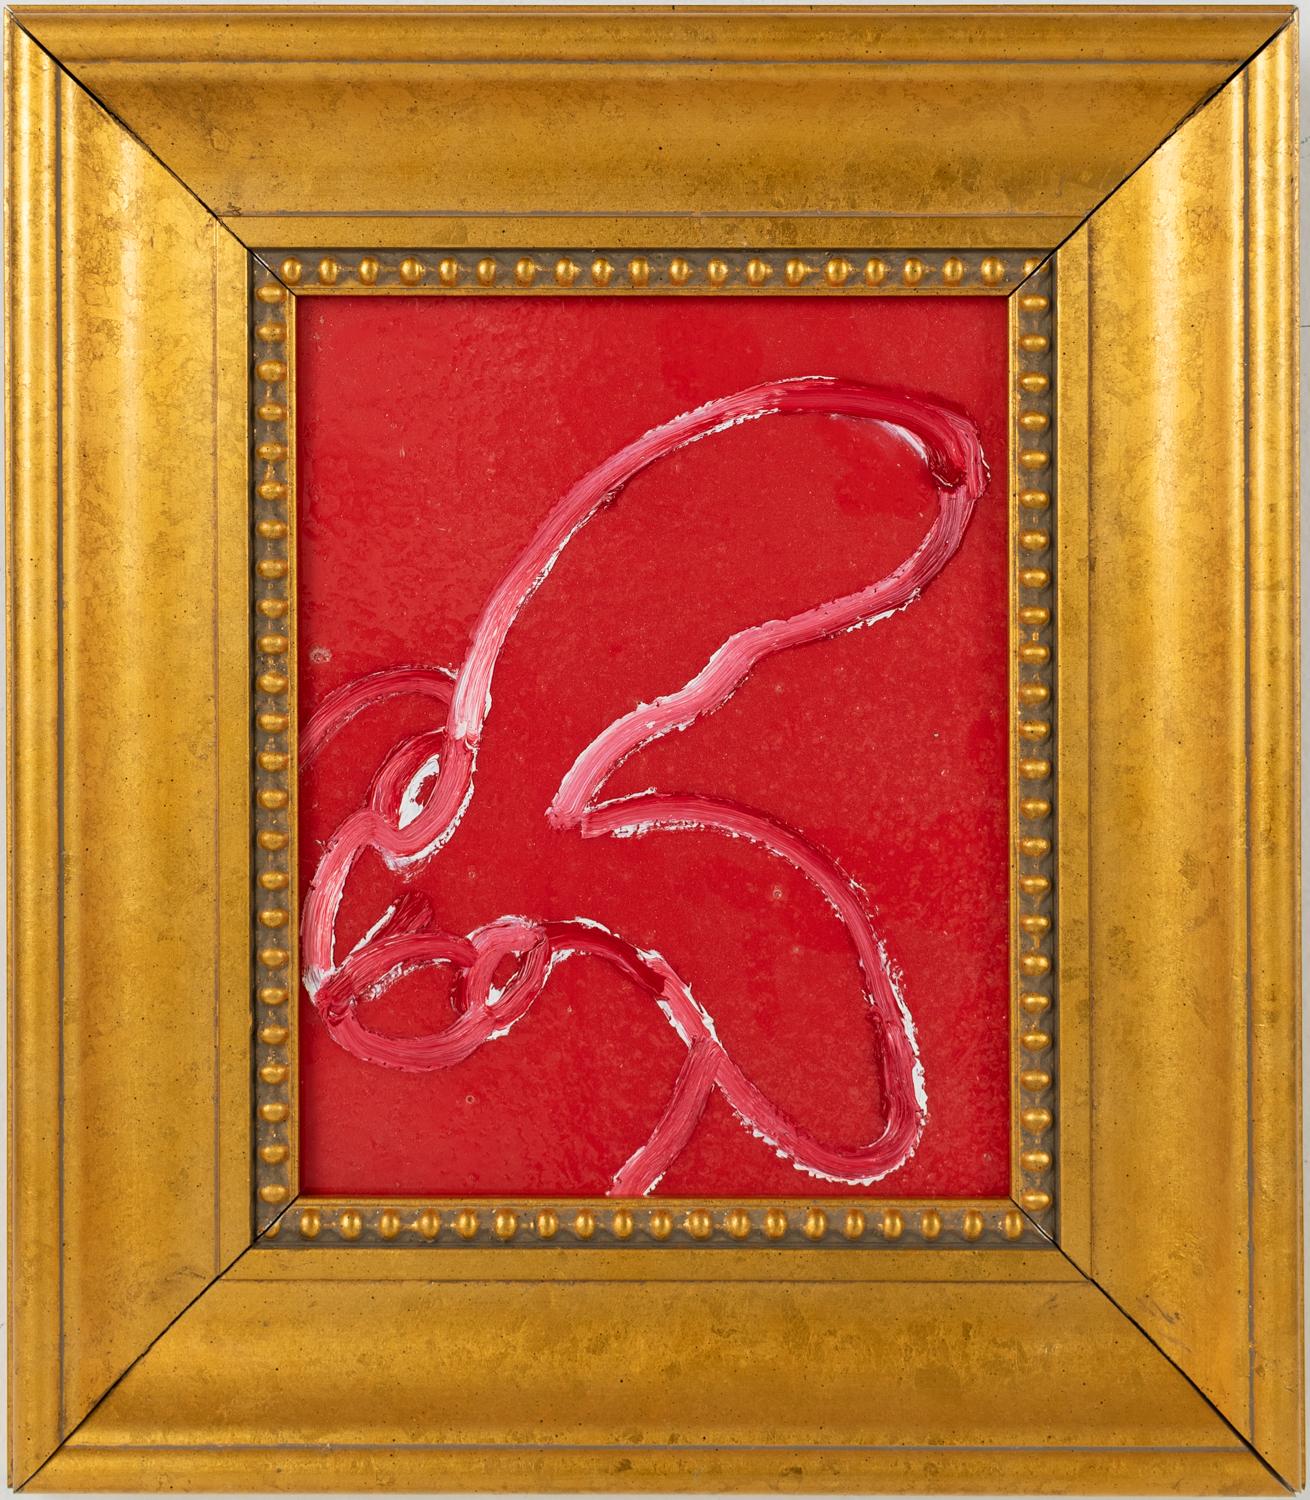 Hunt Slonem "Valentine" Red Bunny
White outlined bunny on a red background, framed 

Unframed: 10 x 8 inches
Framed: 16 x 14 inches
*Painting is framed - Please note Hunt Slonem paintings with frames may show signs of patina due to age and history.